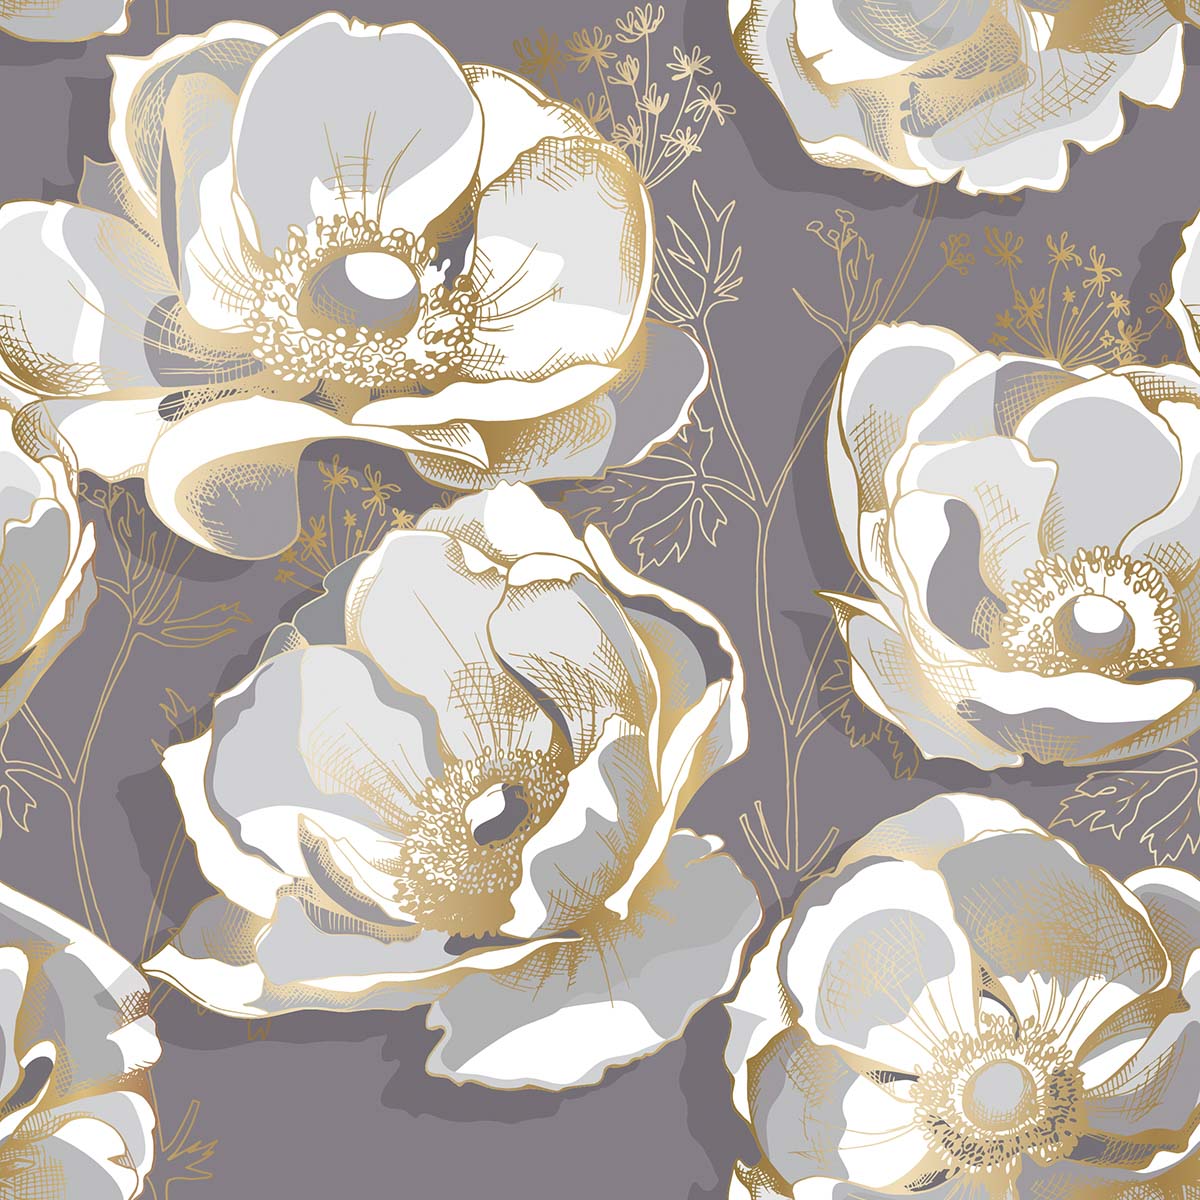 A pattern of white flowers